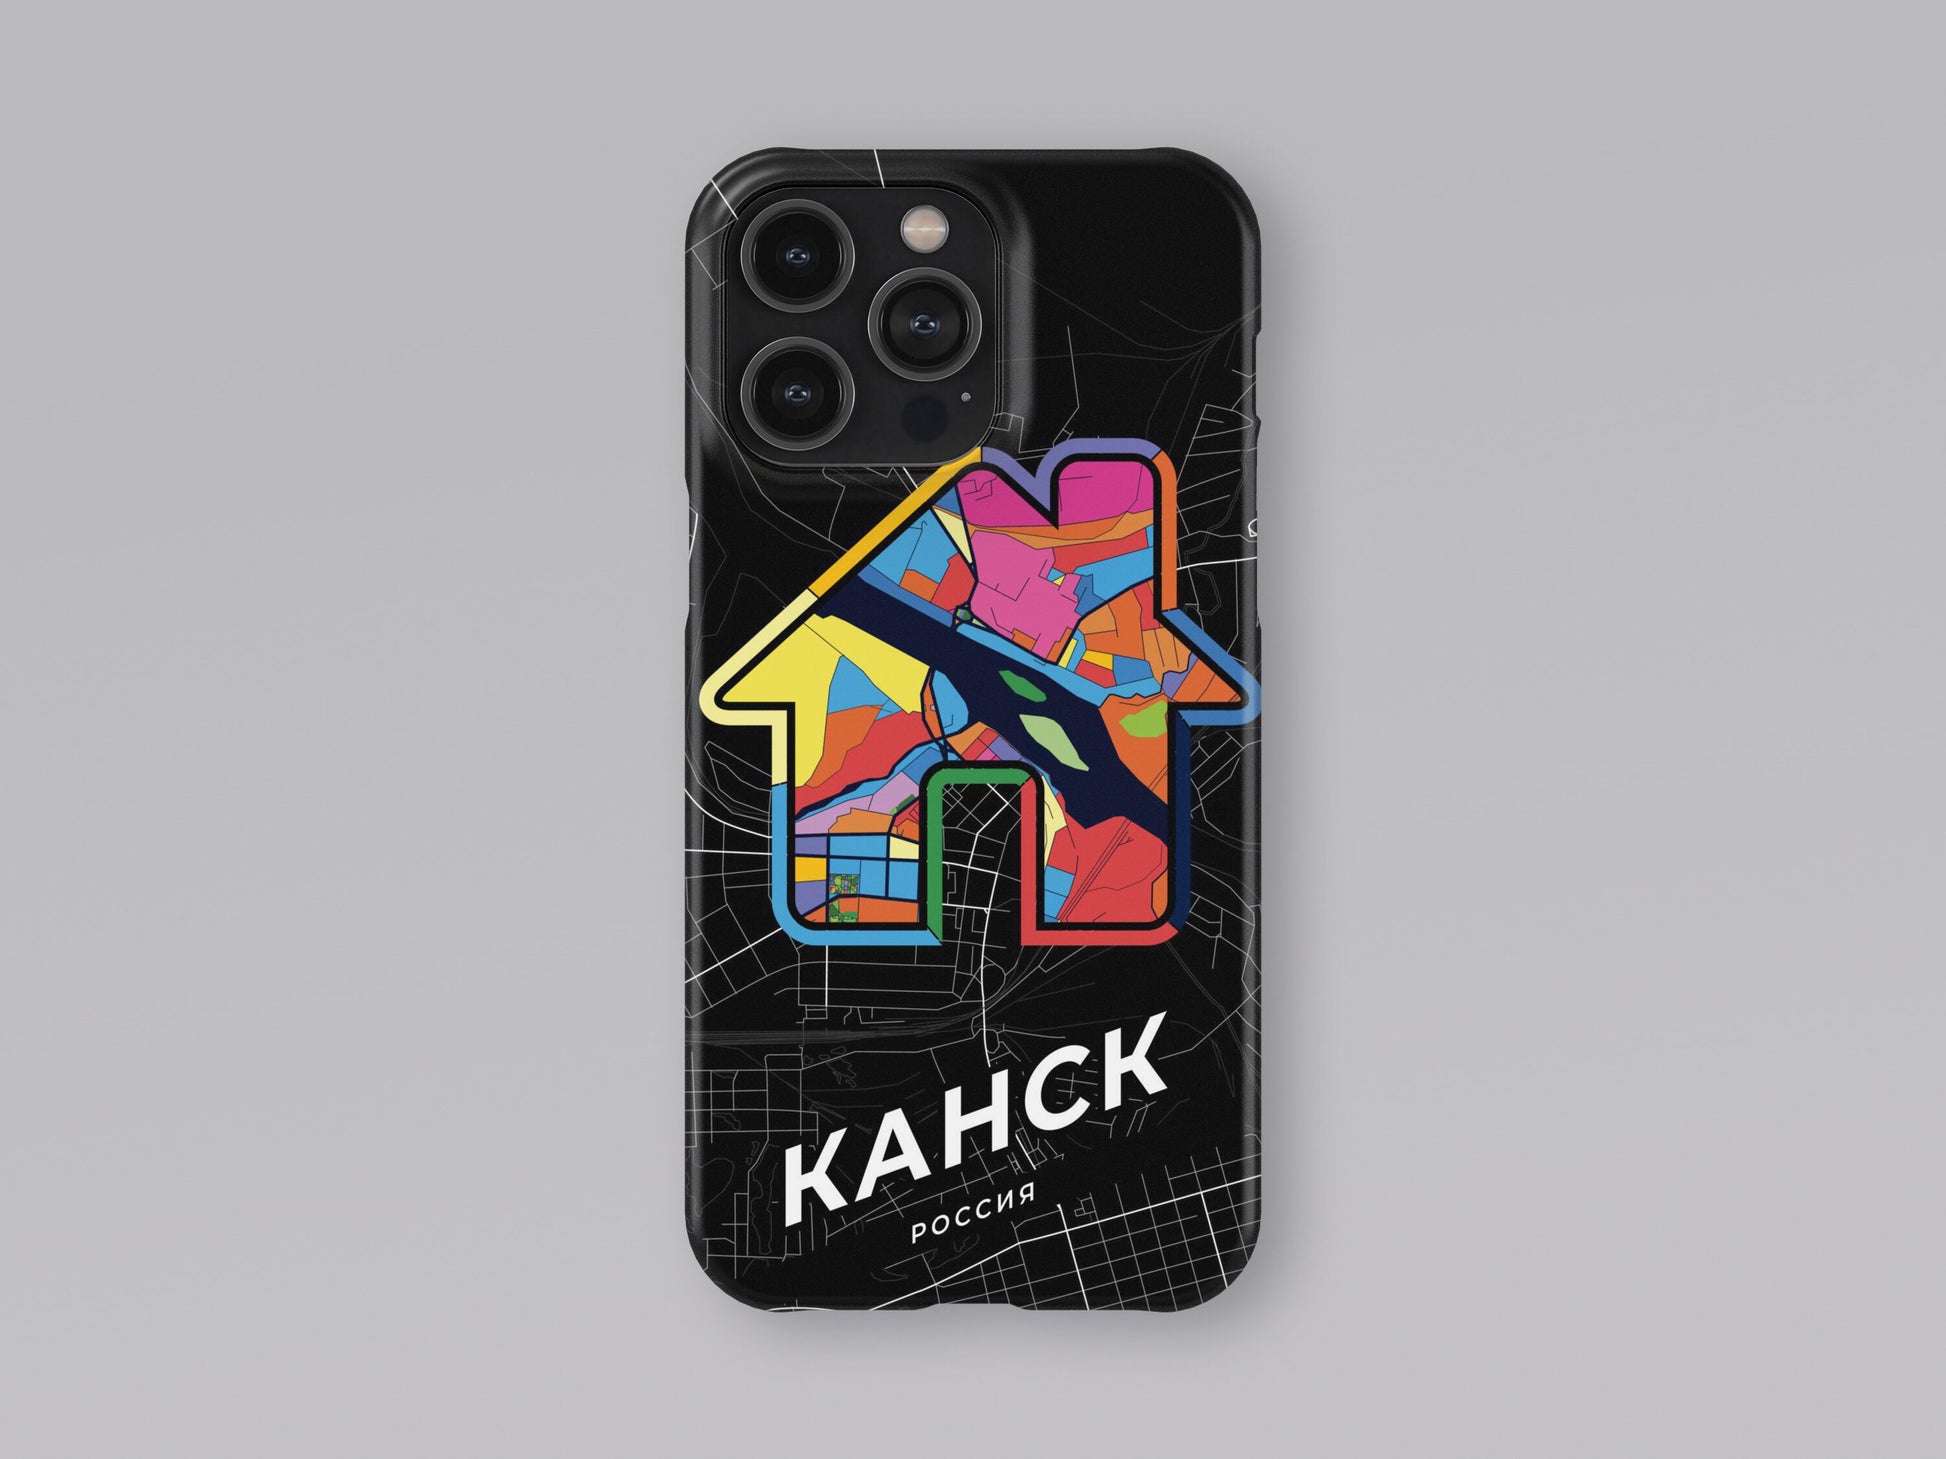 Kansk Russia slim phone case with colorful icon. Birthday, wedding or housewarming gift. Couple match cases. 3